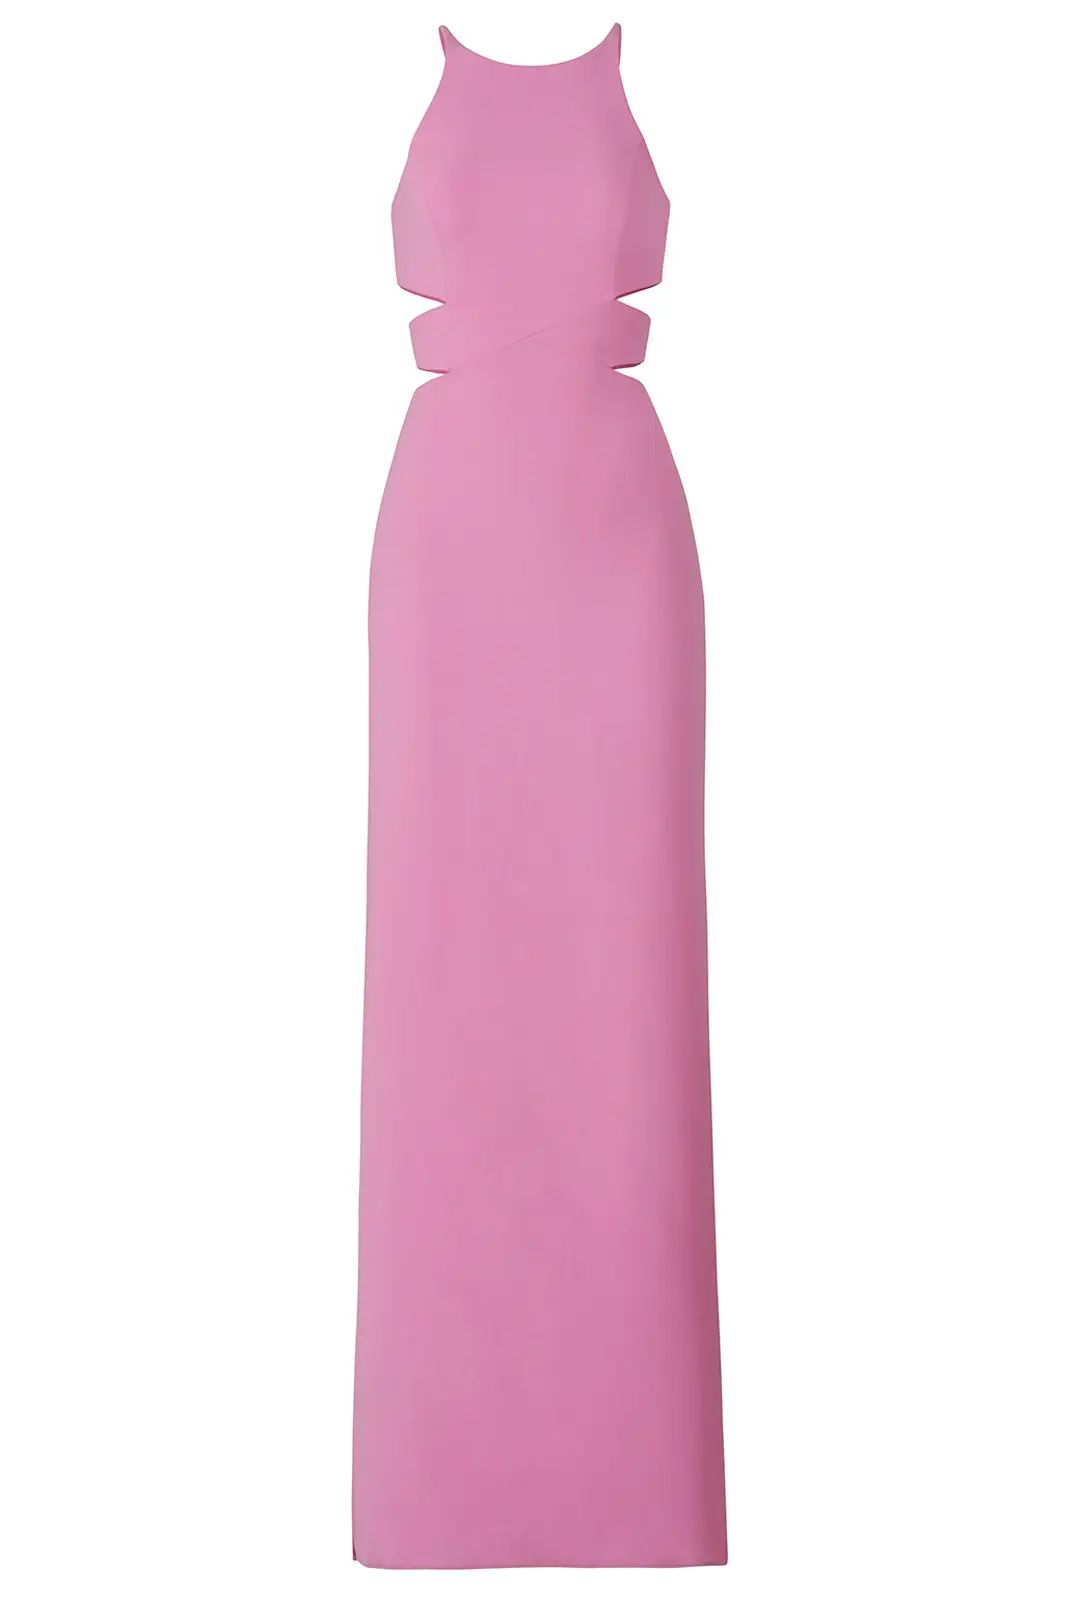 Halston Heritage Pink Cut Out Gown | Rent The Runway